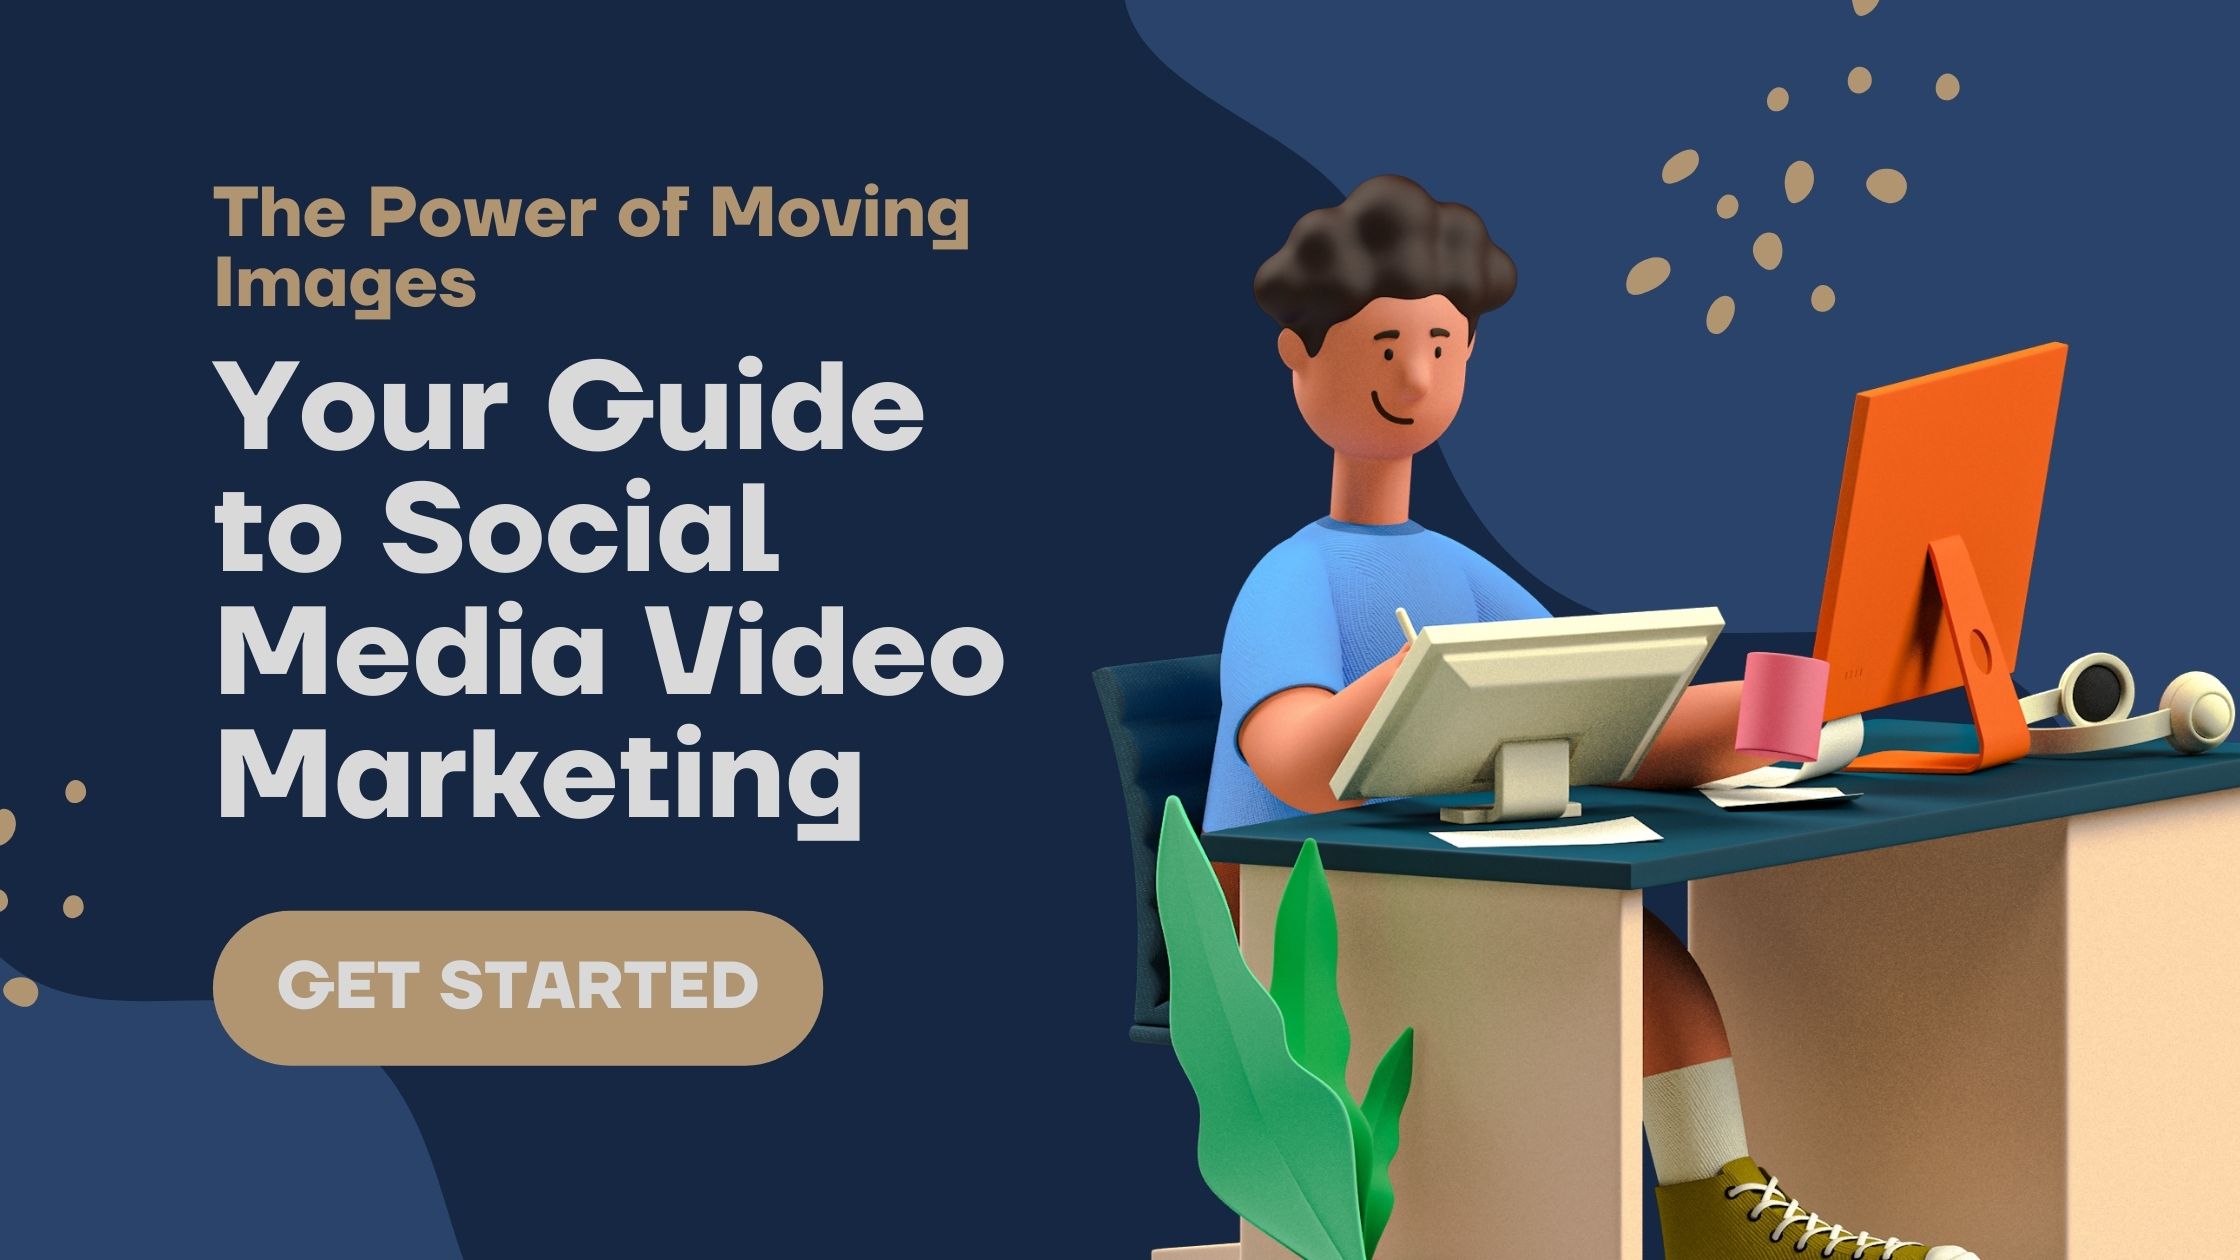 The Power of Moving Images: Your Guide to Social Media Video Marketing